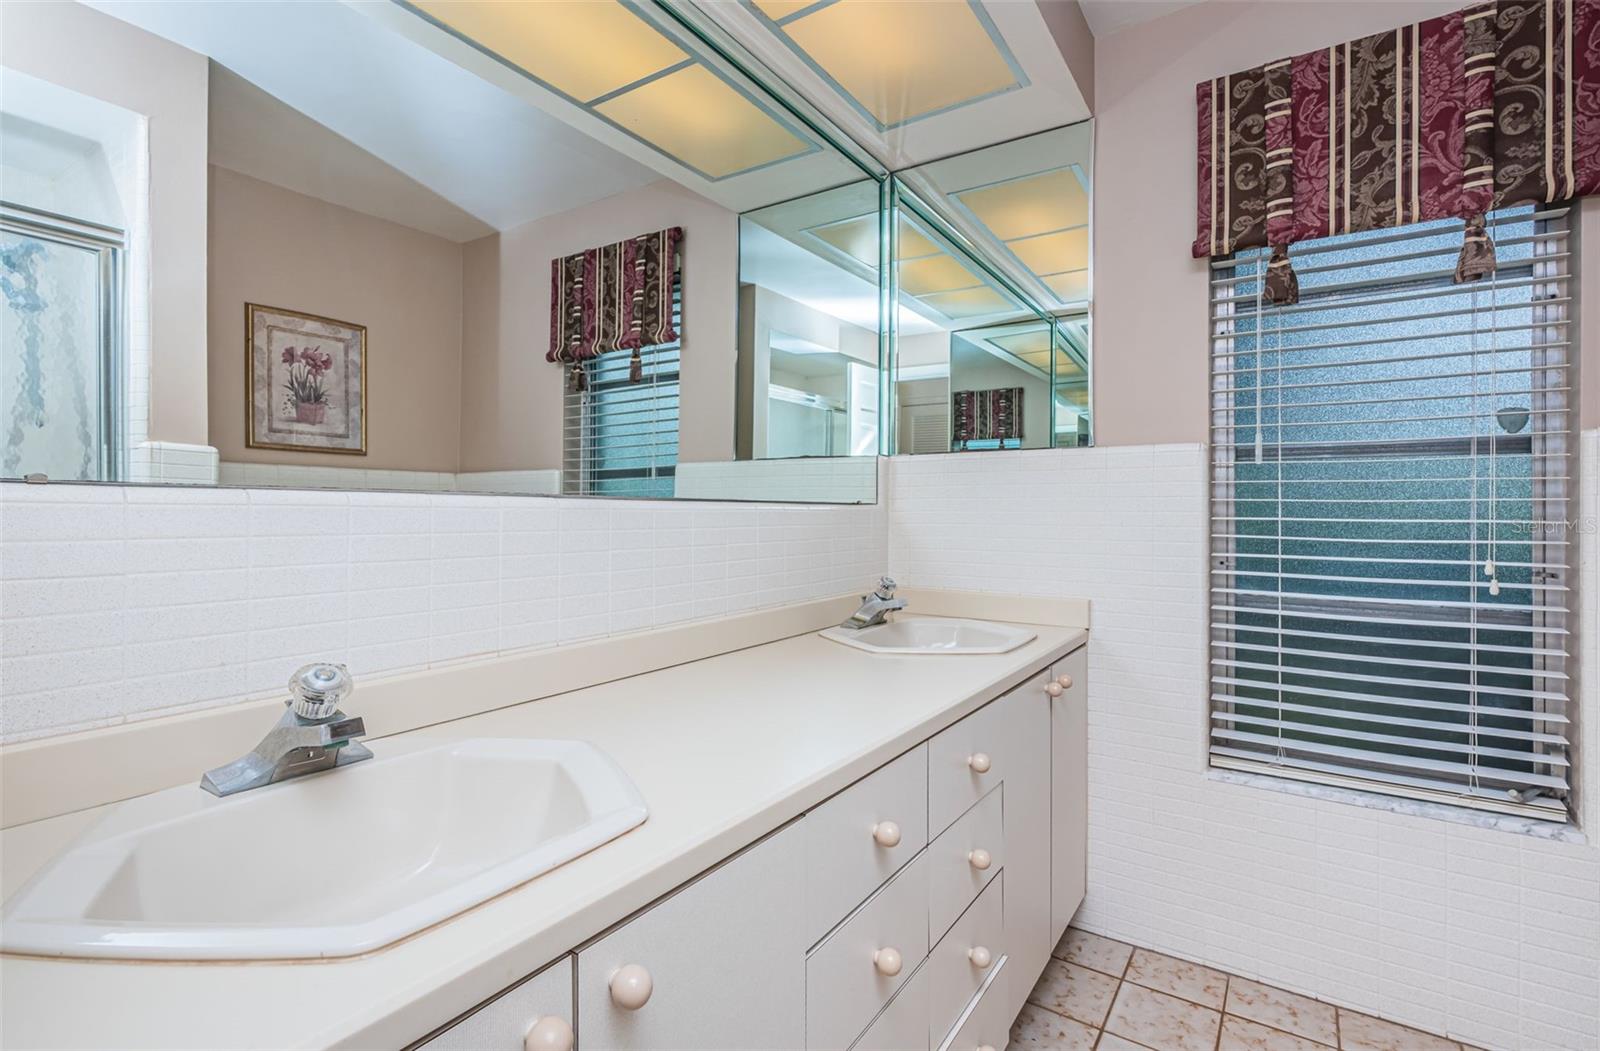 The other bathroom is equipped with double sinks, providing convenience for your daily routines. Additionally, there's a convenient cabinet under each sink, offering ample storage for your bathroom essentials.